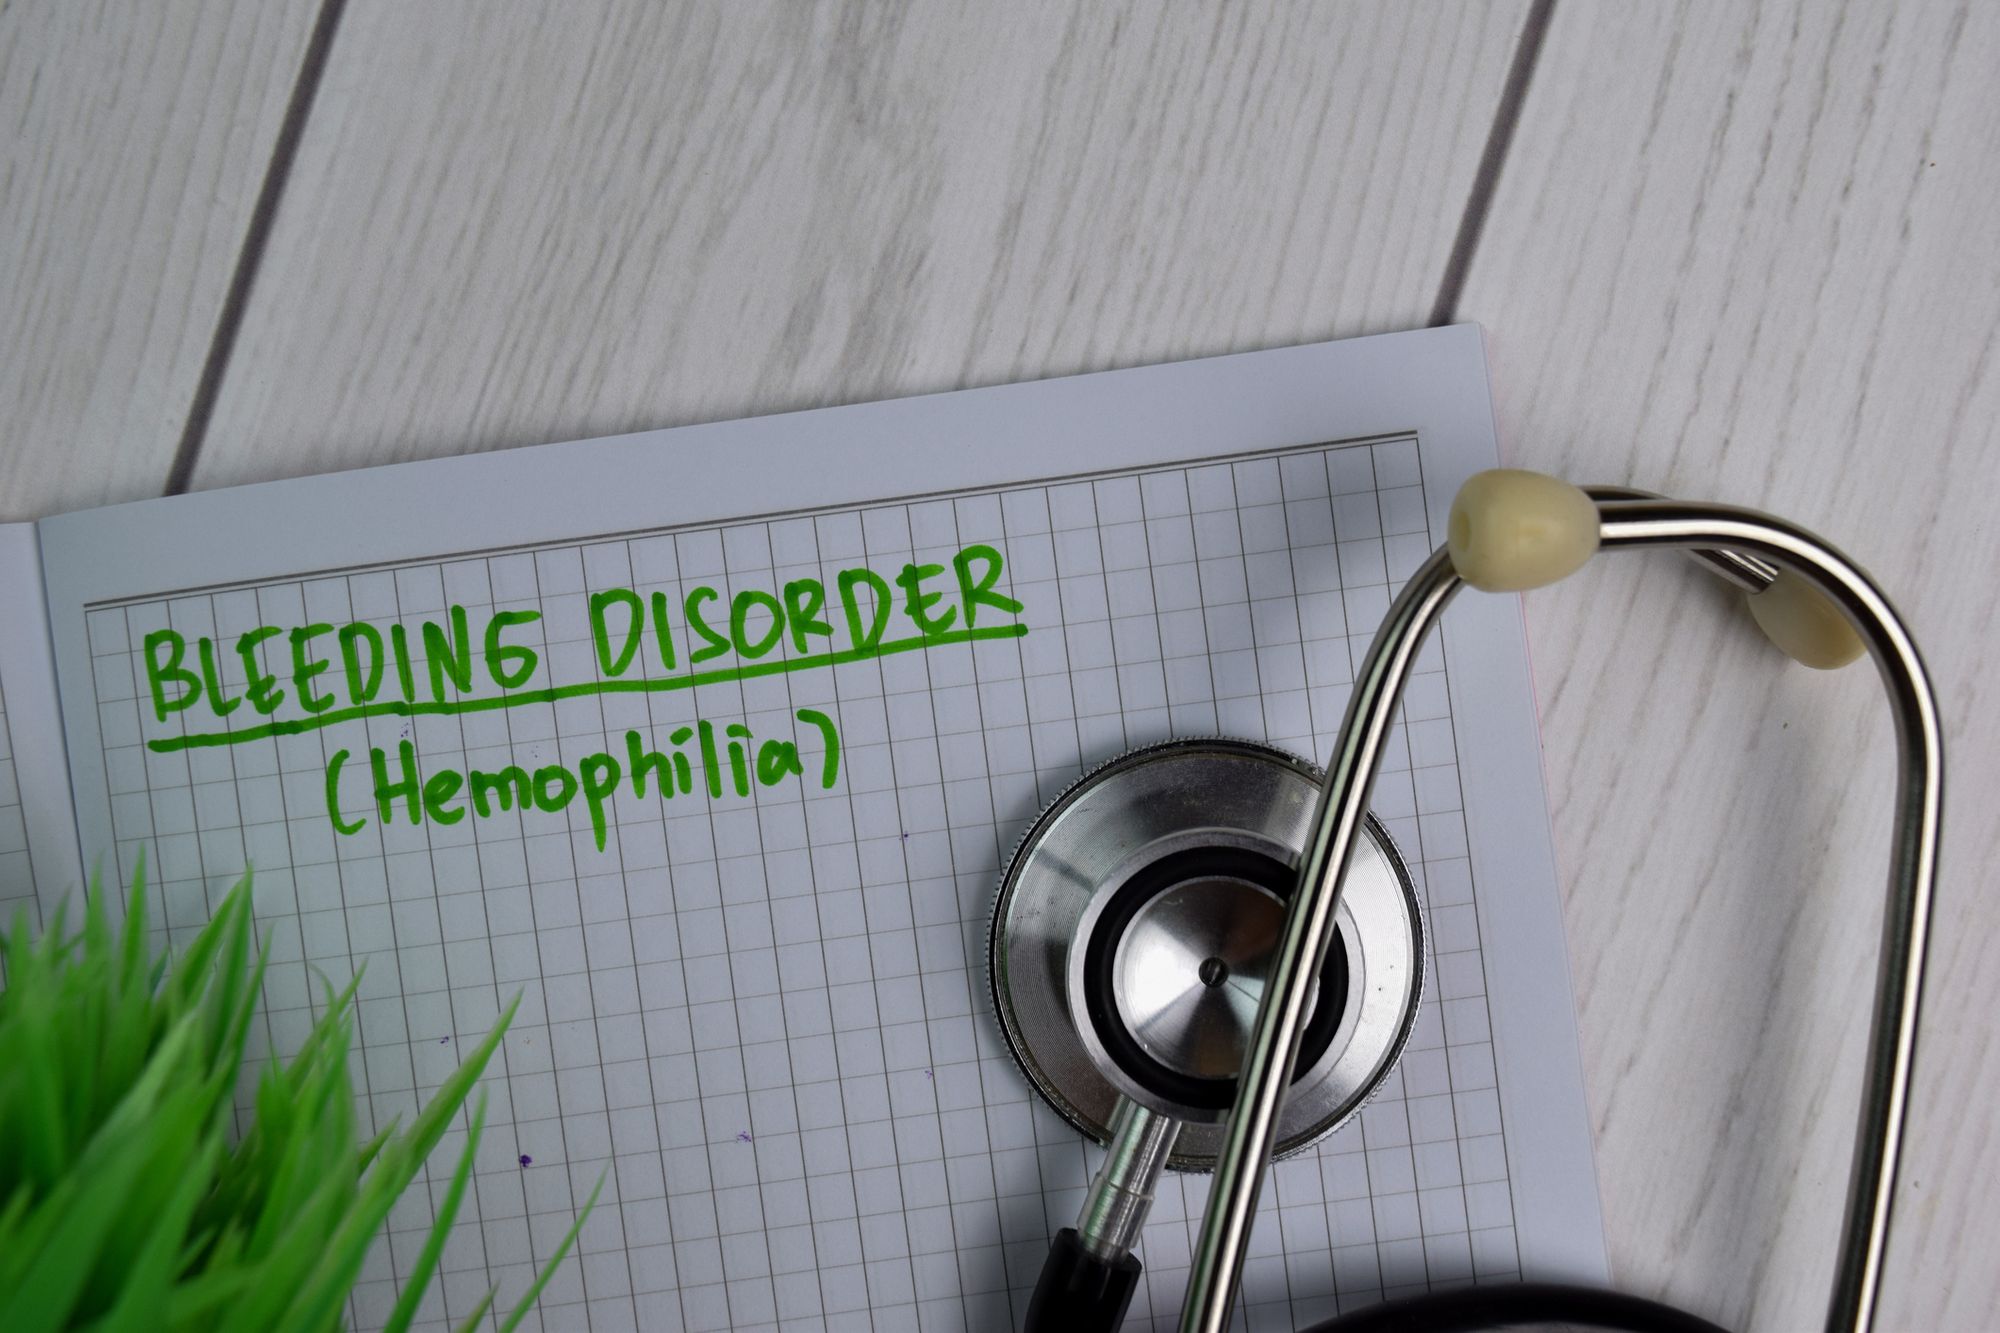 Bleeding Disorder Hemophilia text write on a book isolated on office desk. Healthcare/Medical concept